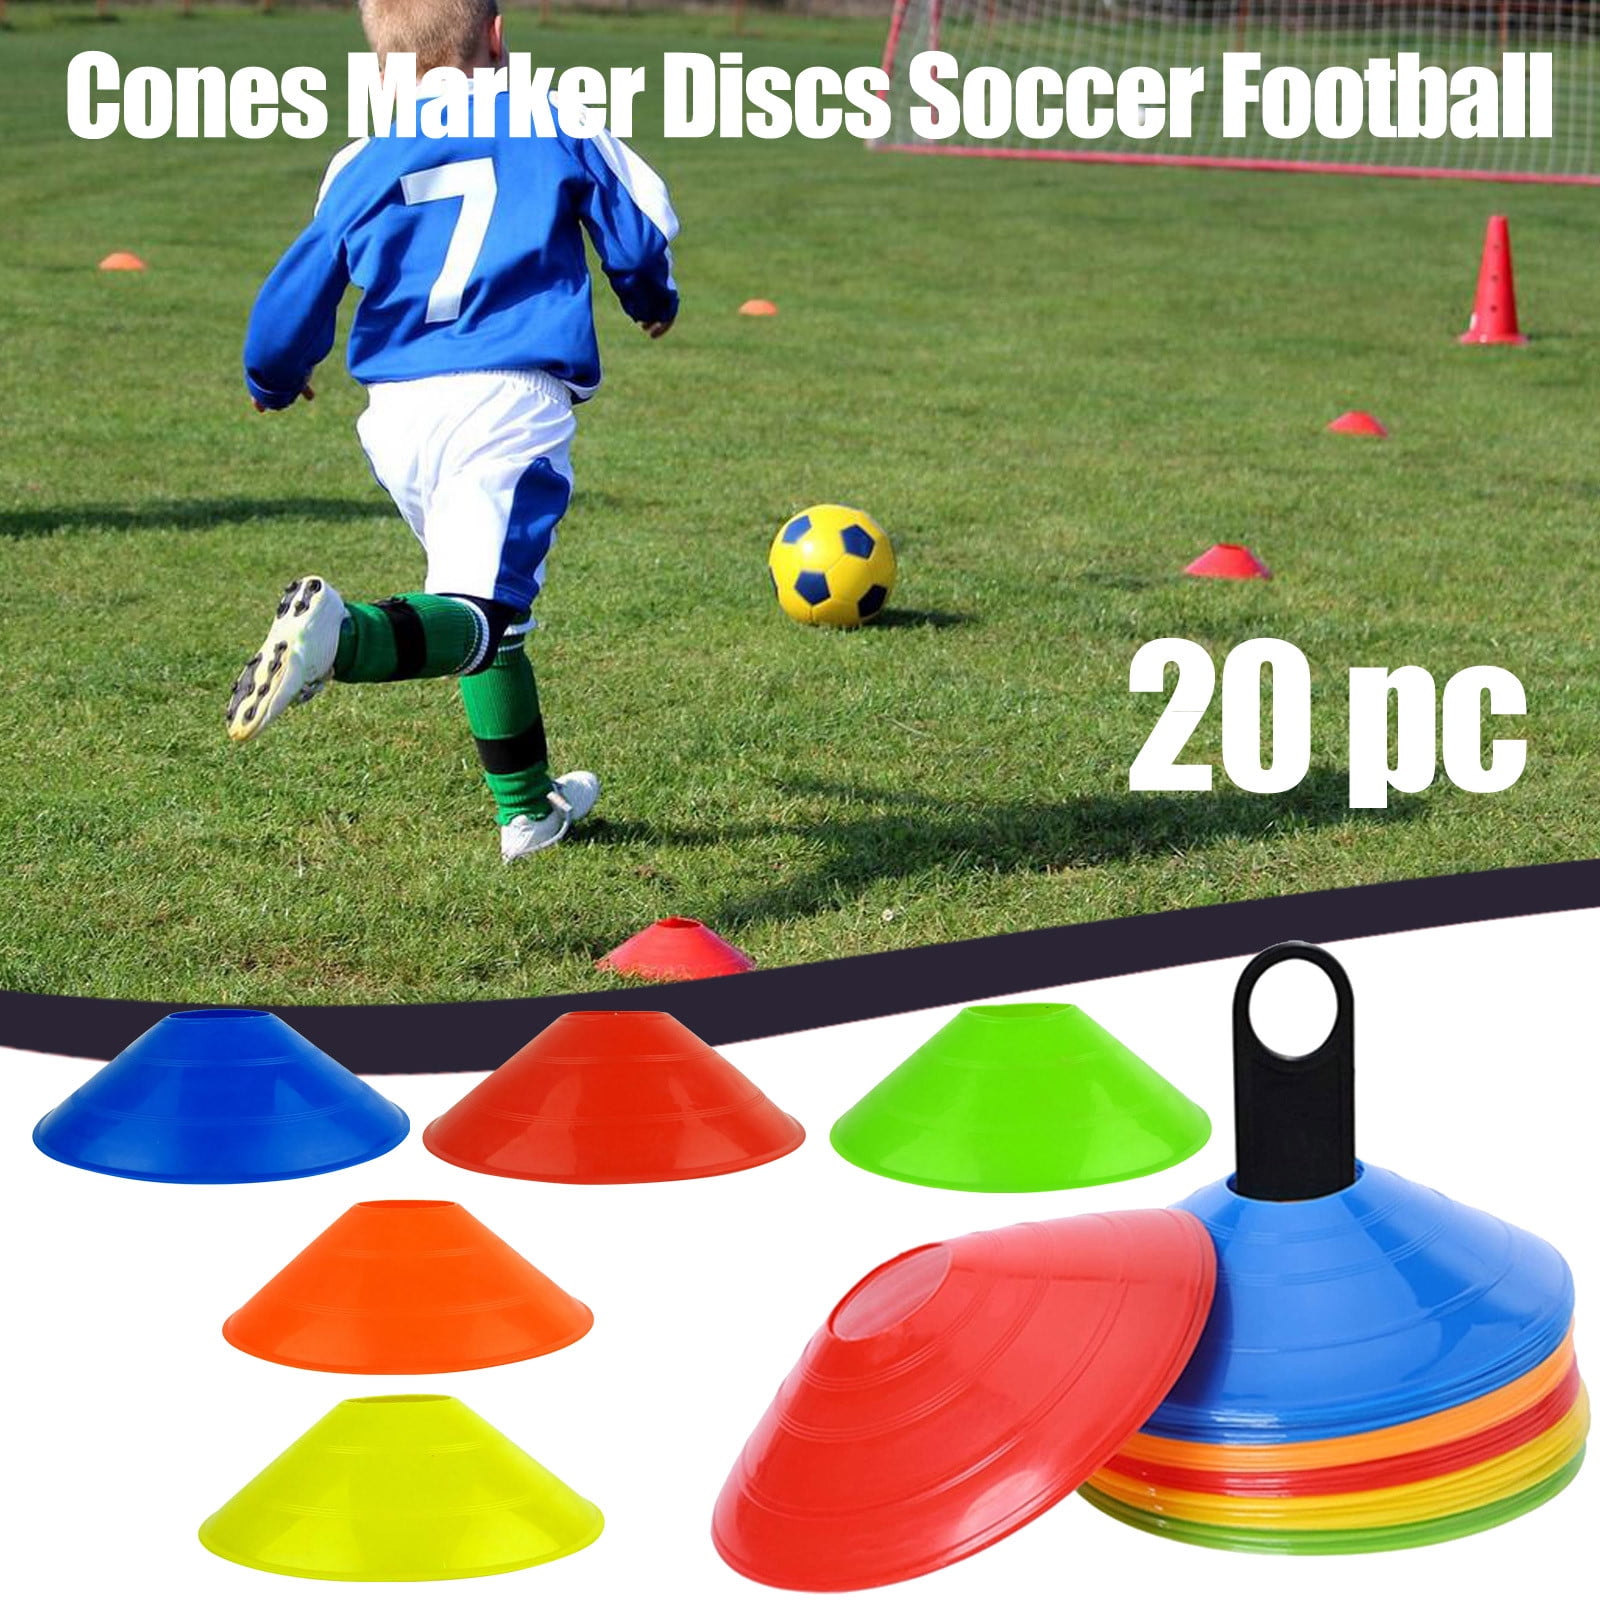 New Set of 10 Space Markers Cones Soccer Football Ball Training Equipment、>b Df. 